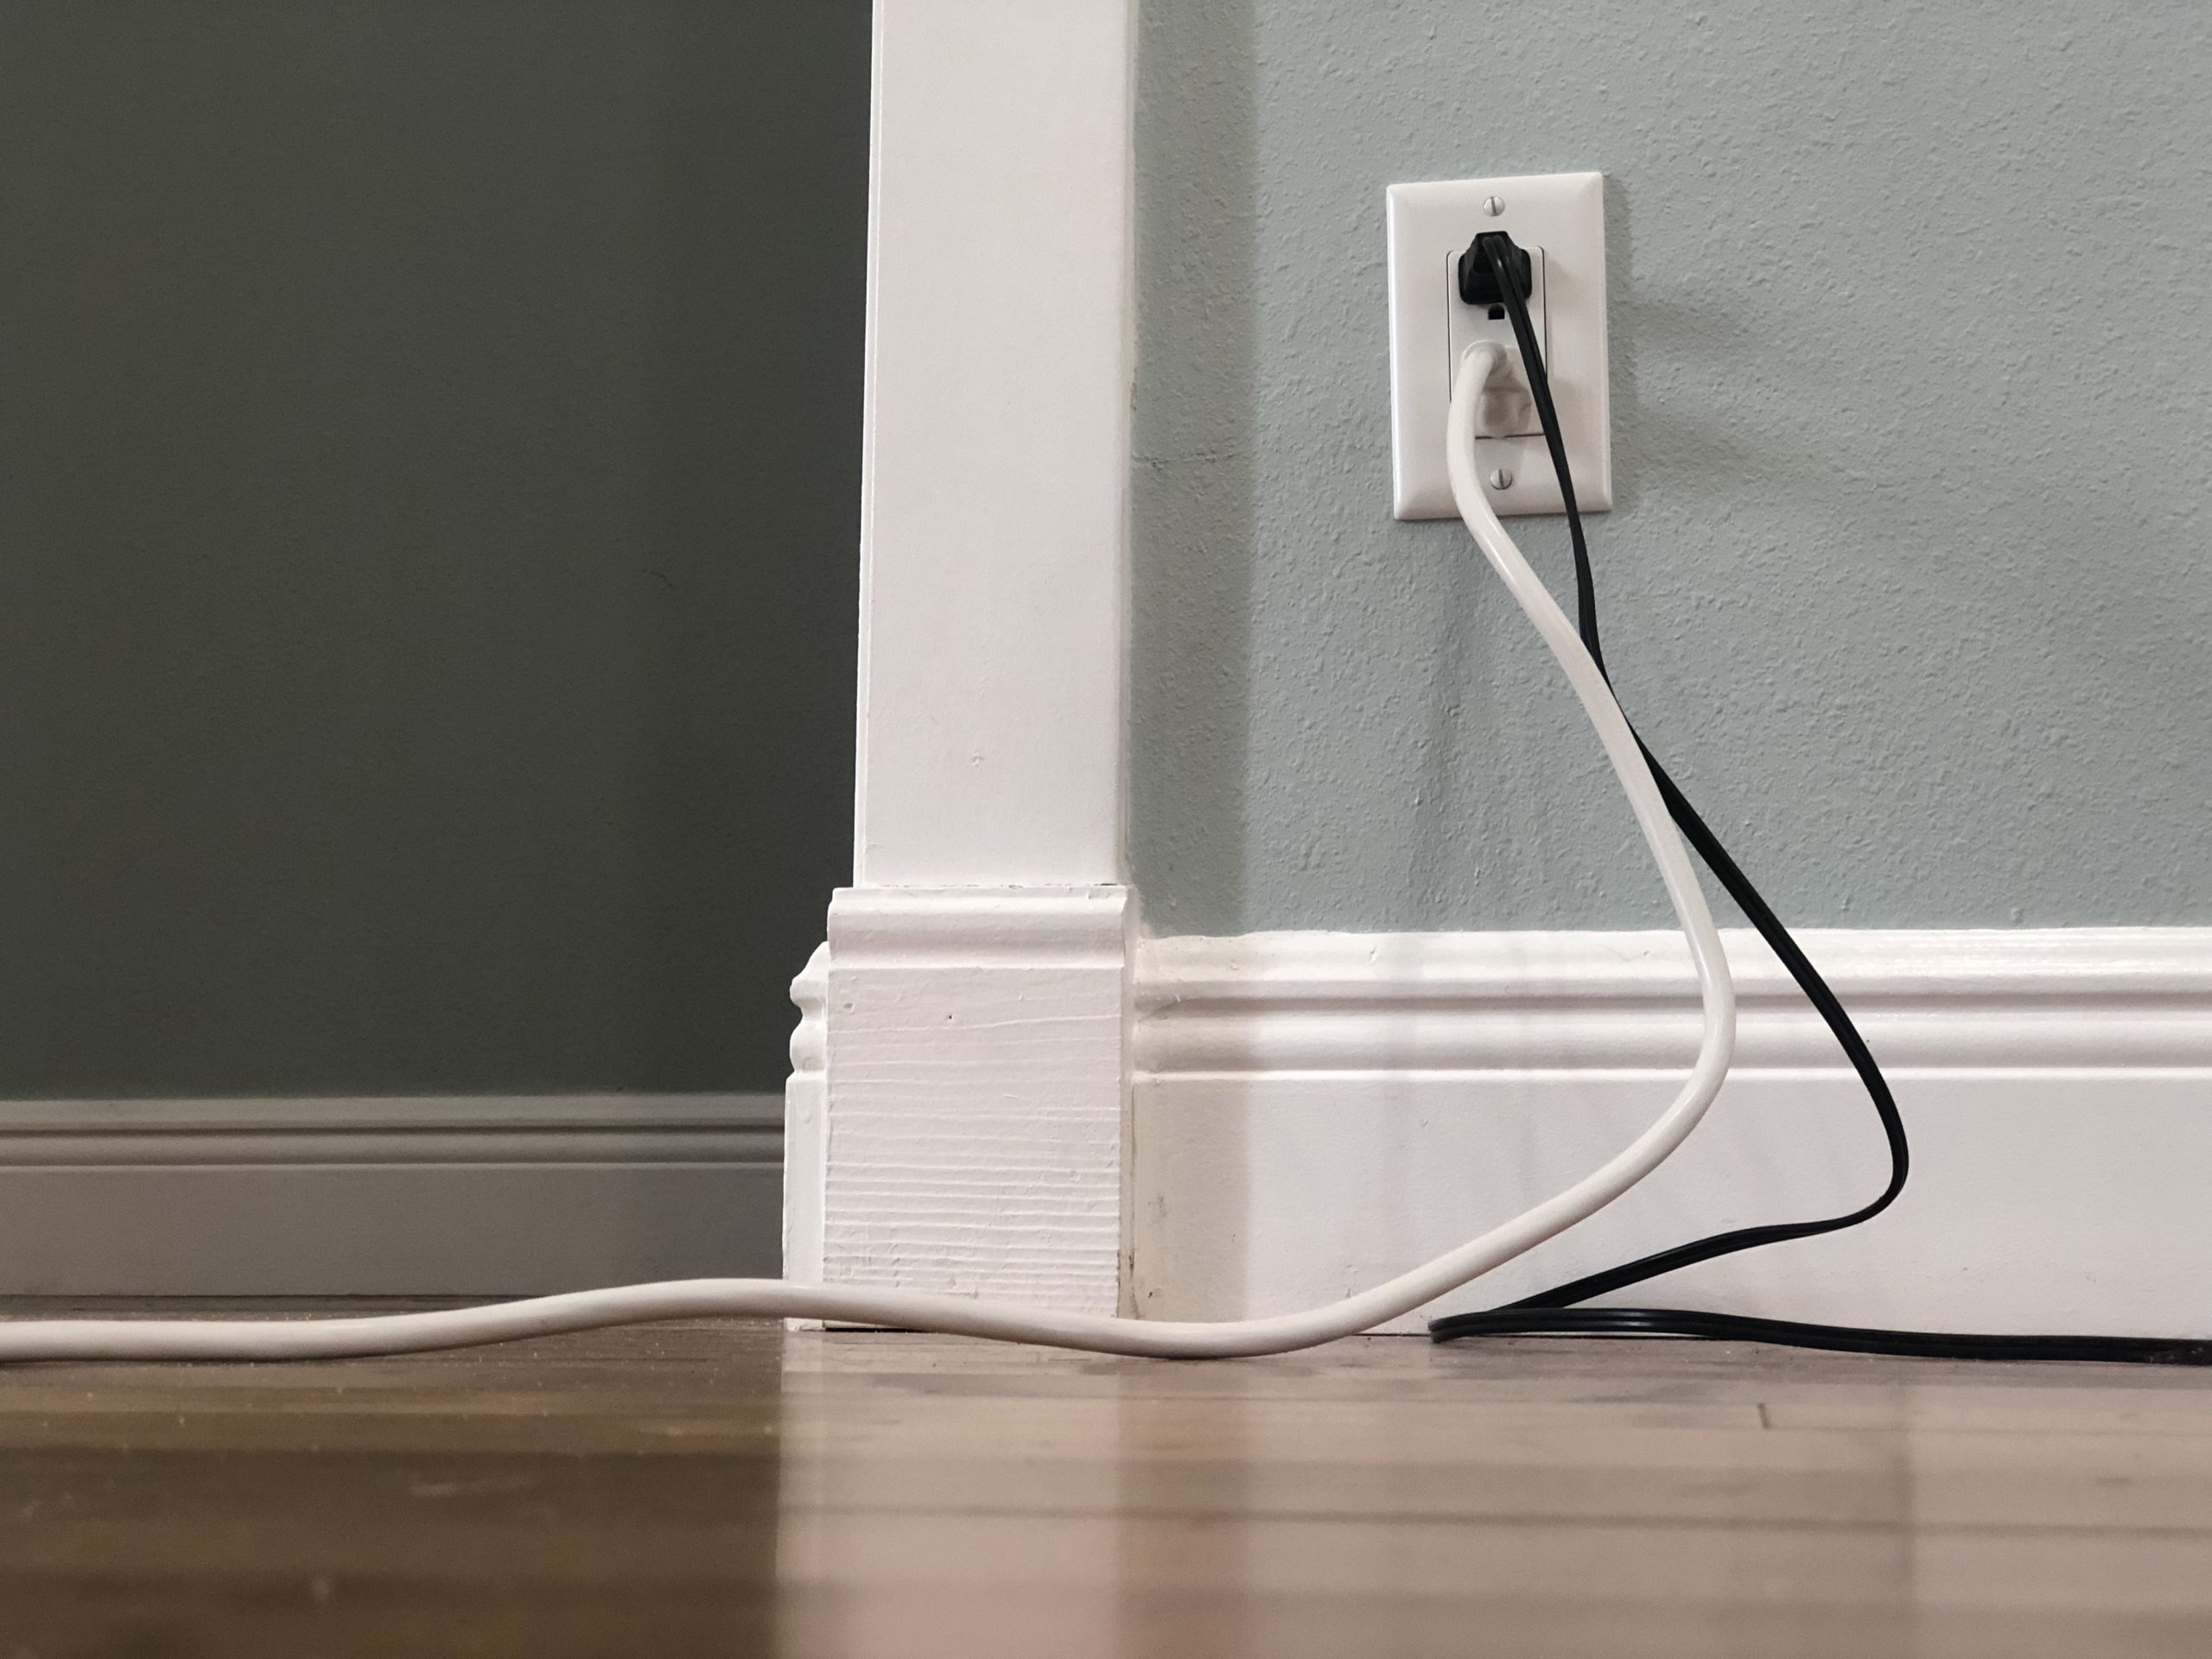 For some renters, it's in the little details like convenient wall outlets. 